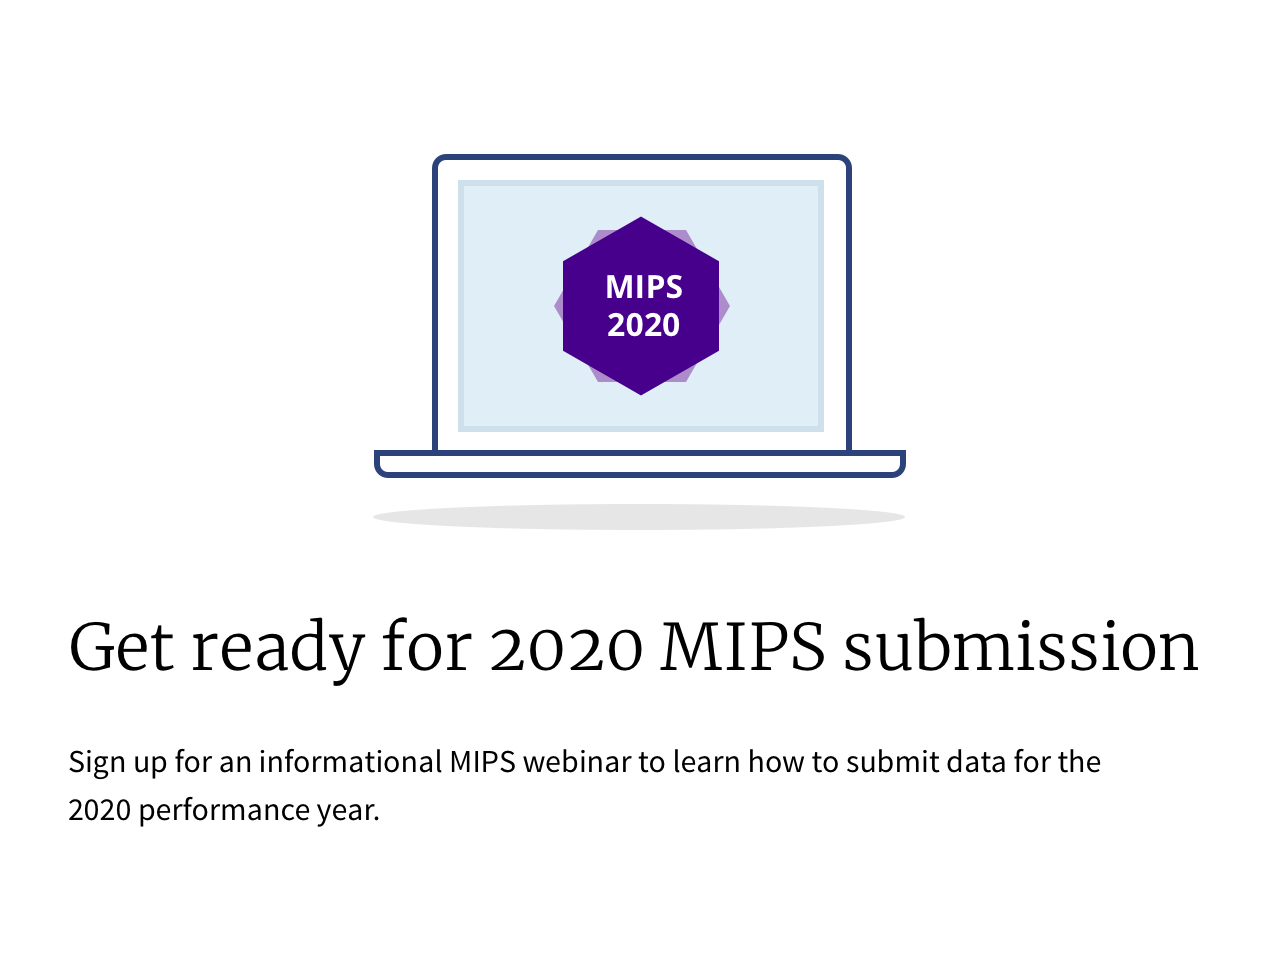 MIPS-2020-Submission